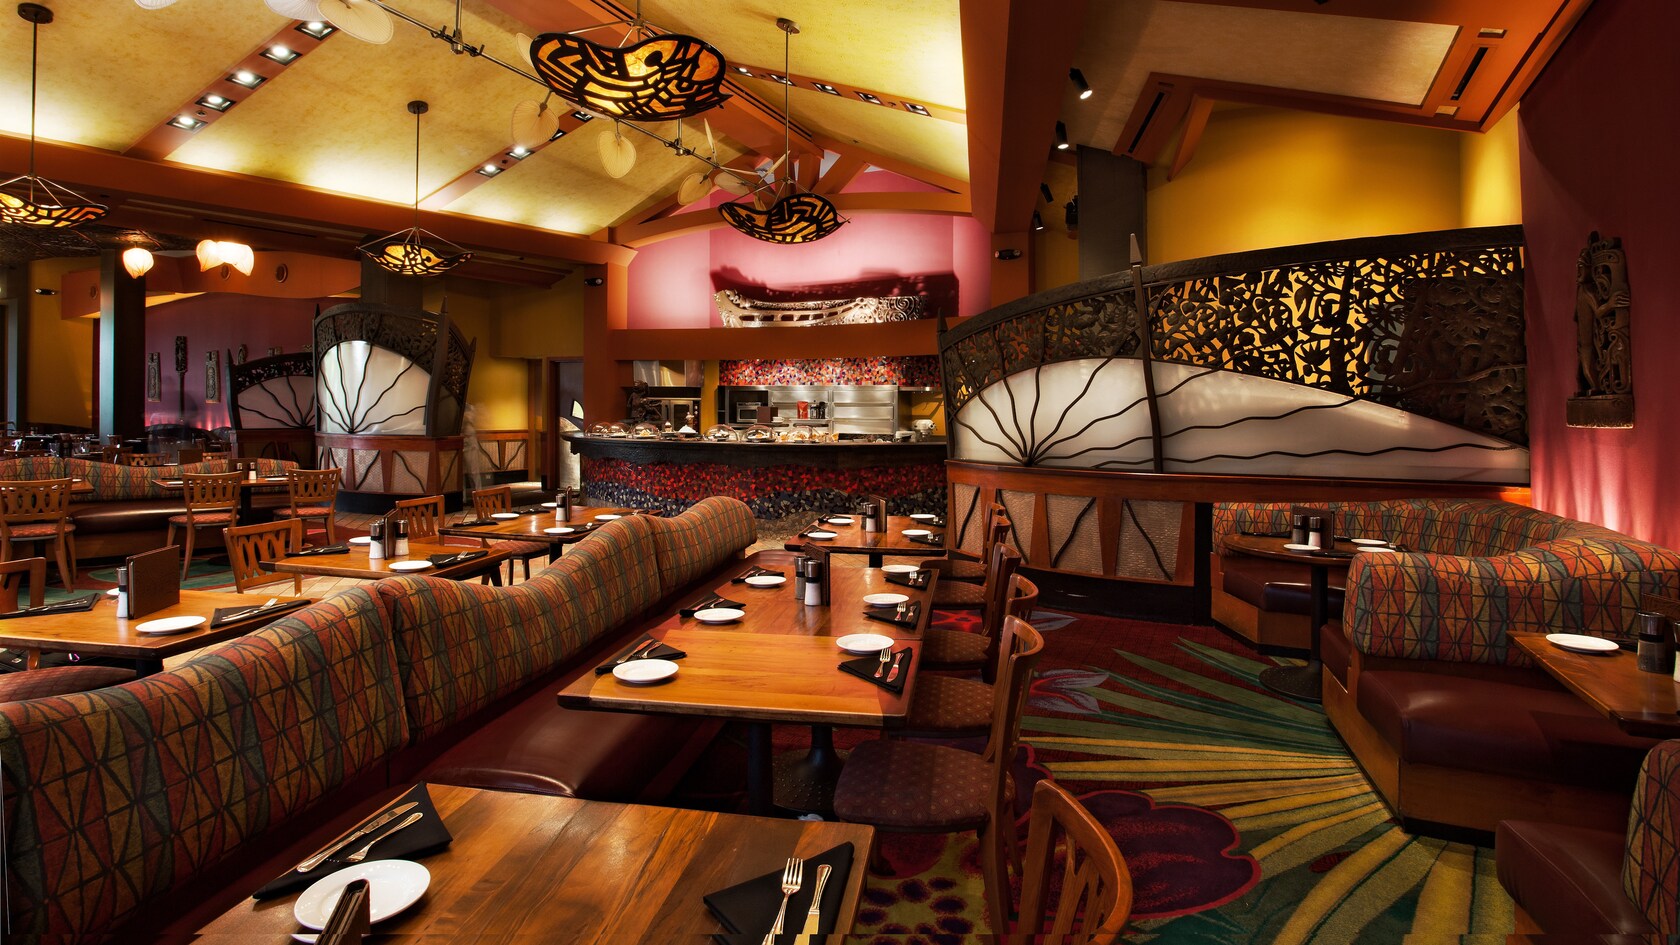 16 of the Best Disney World Hotel Restaurants The Family Vacation Guide